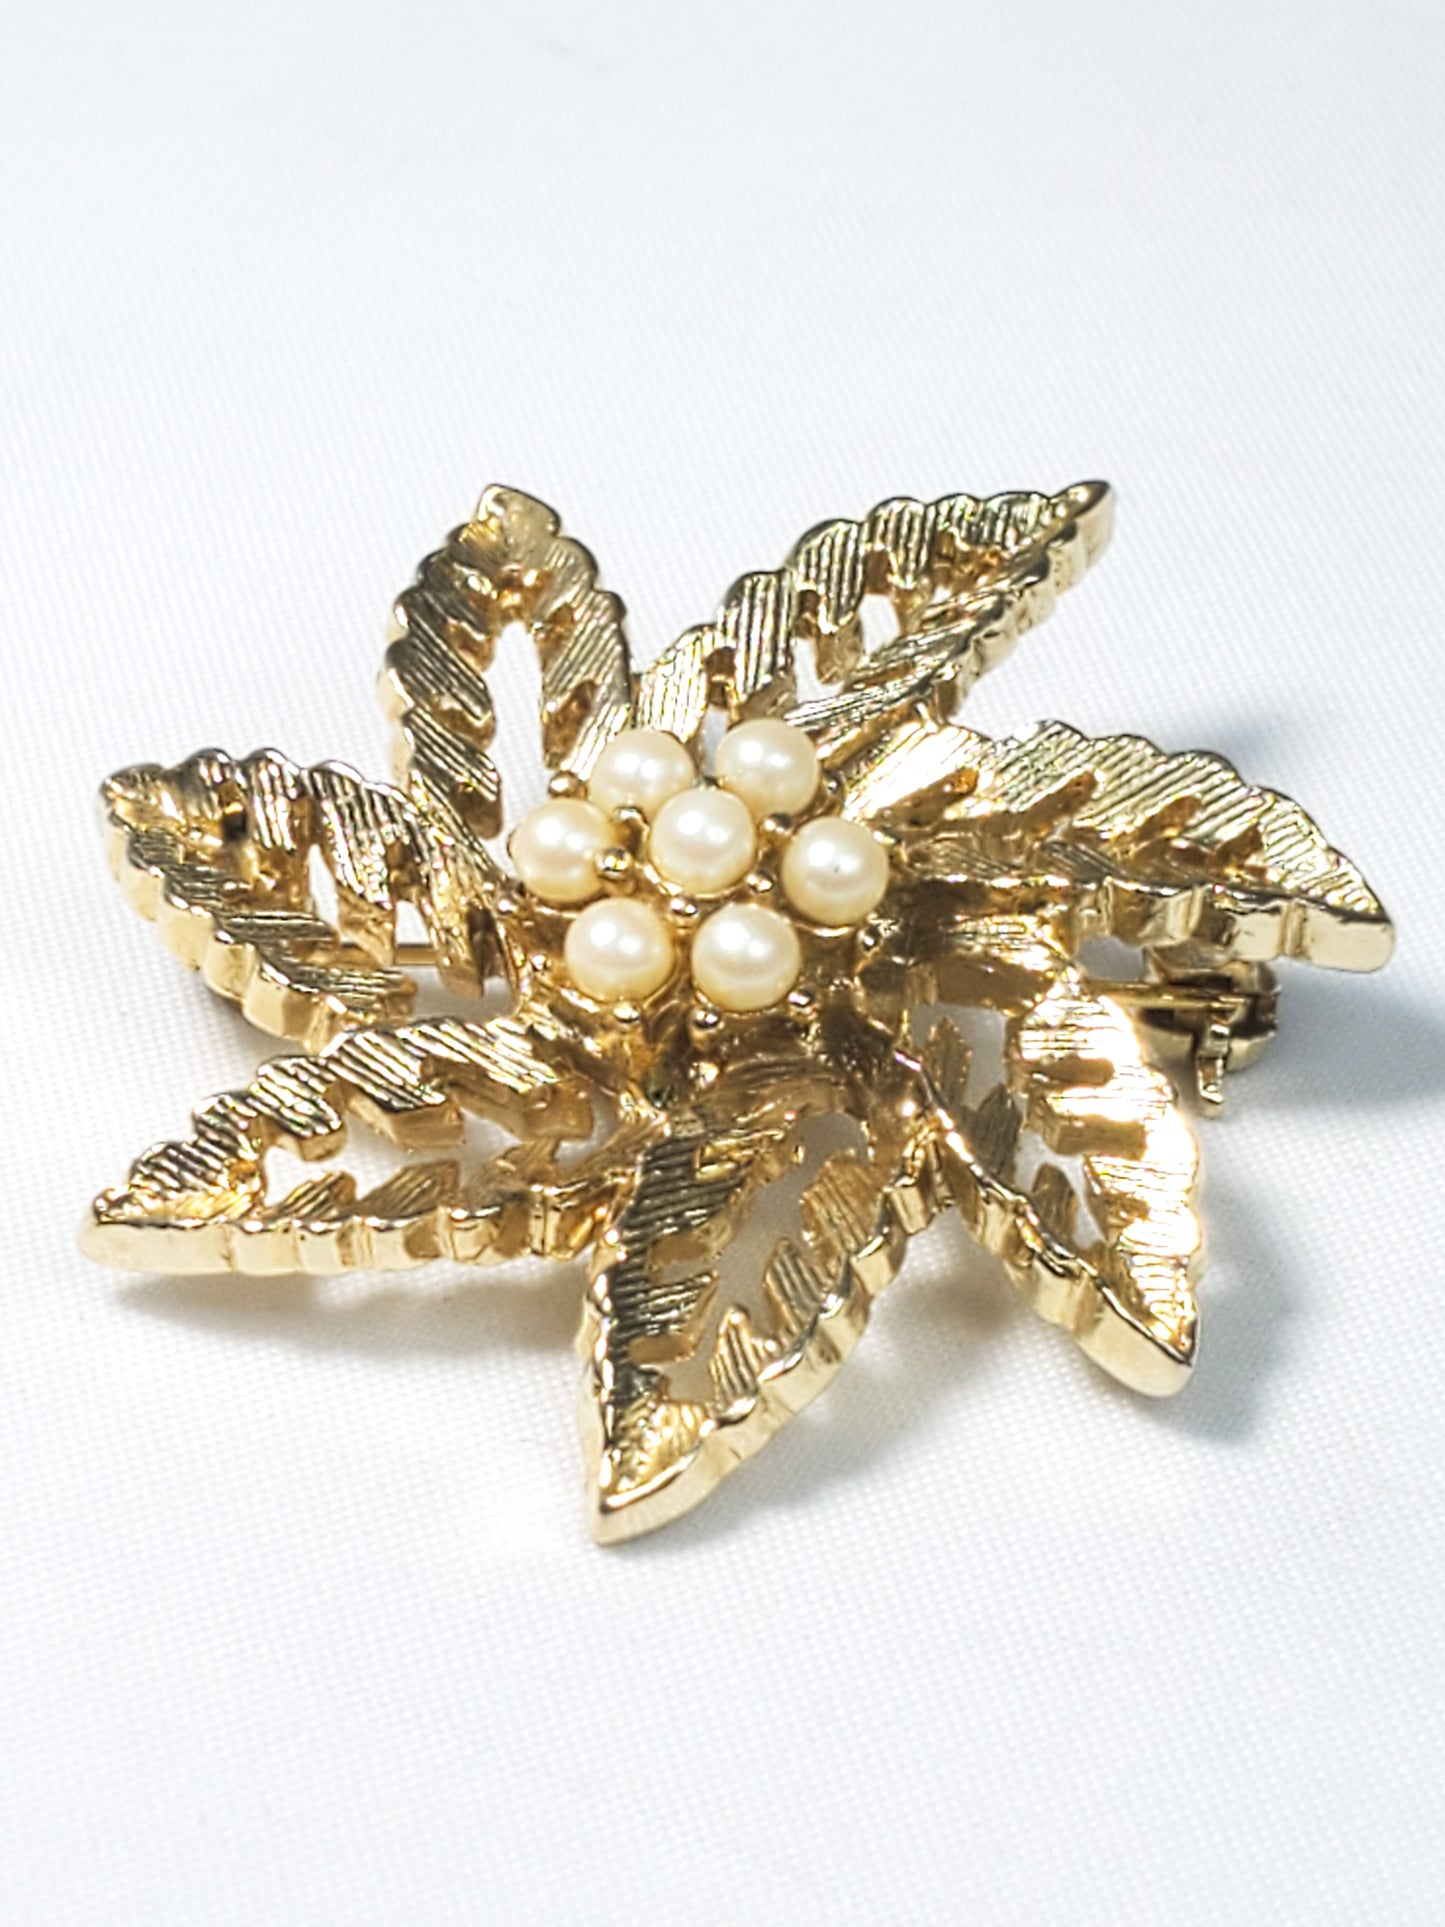 Vintage snowflake style leaf brooch with faux pearl flower accent pin